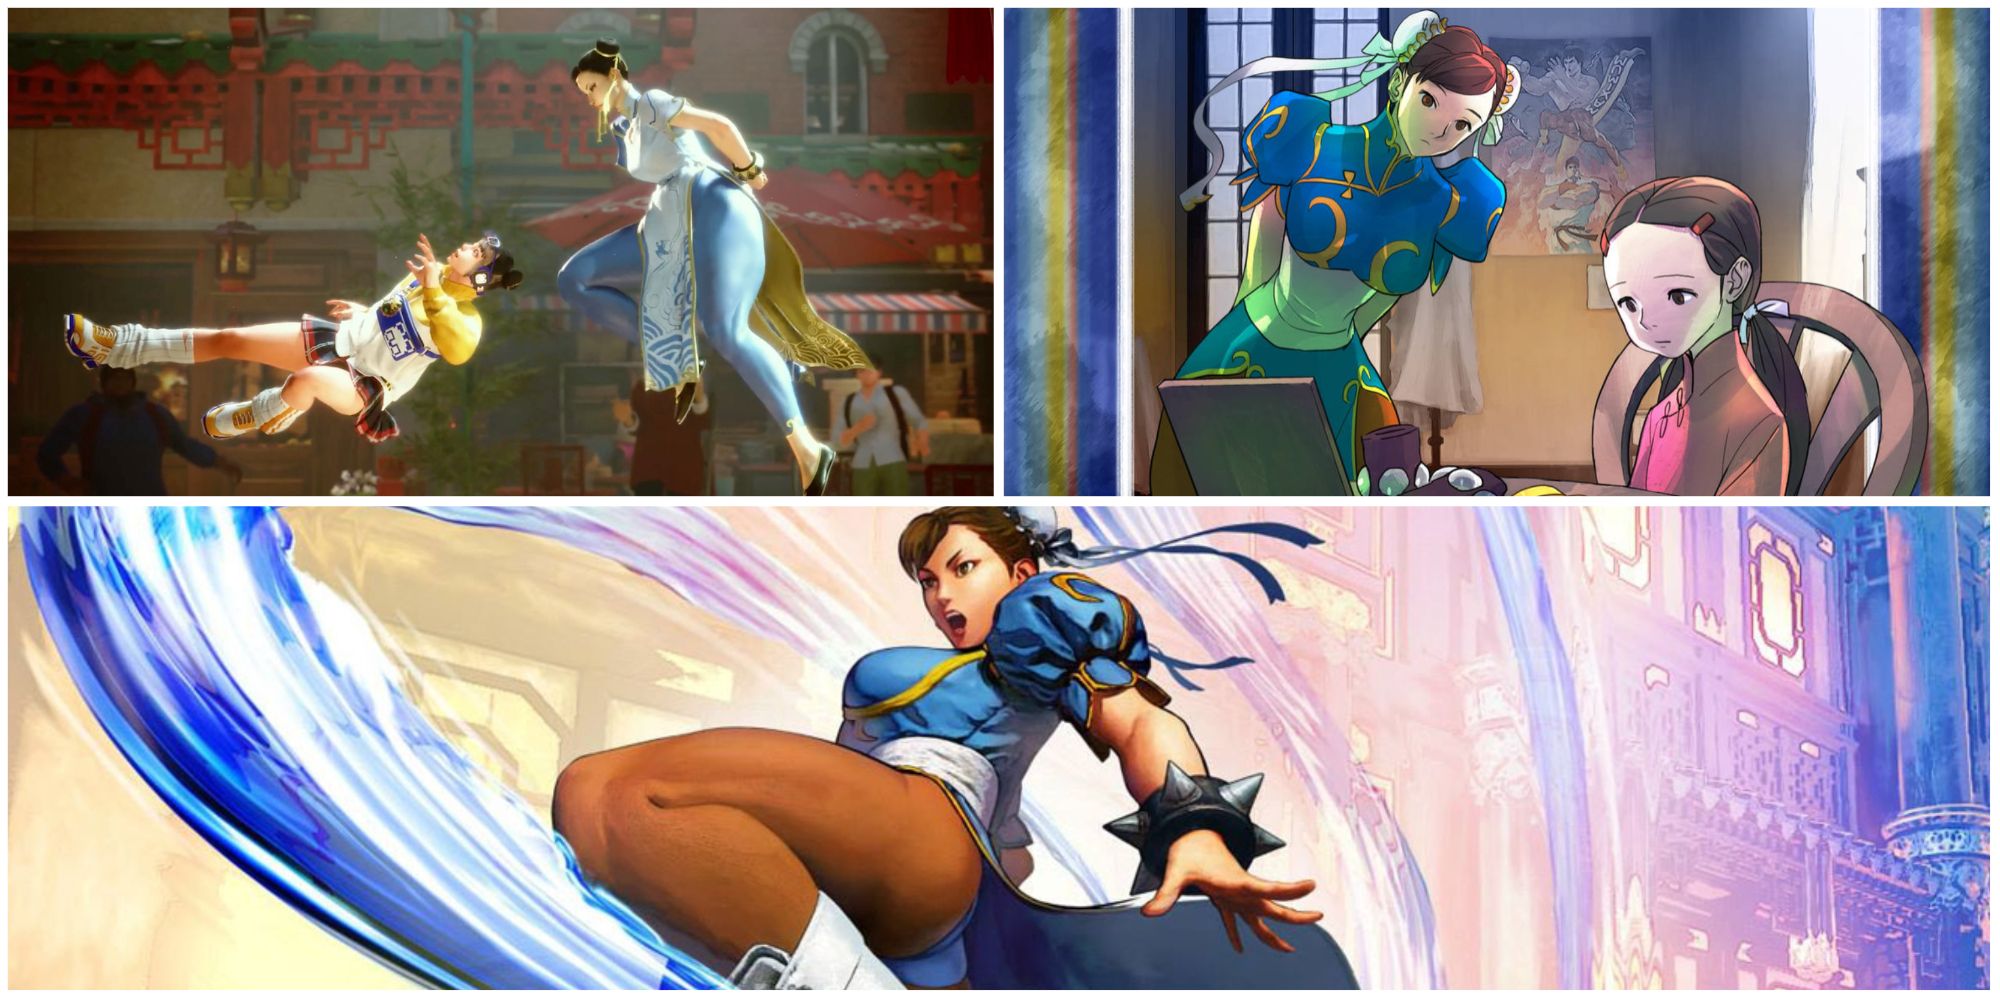 The Complete Story Of Chun-Li In Street Fighter